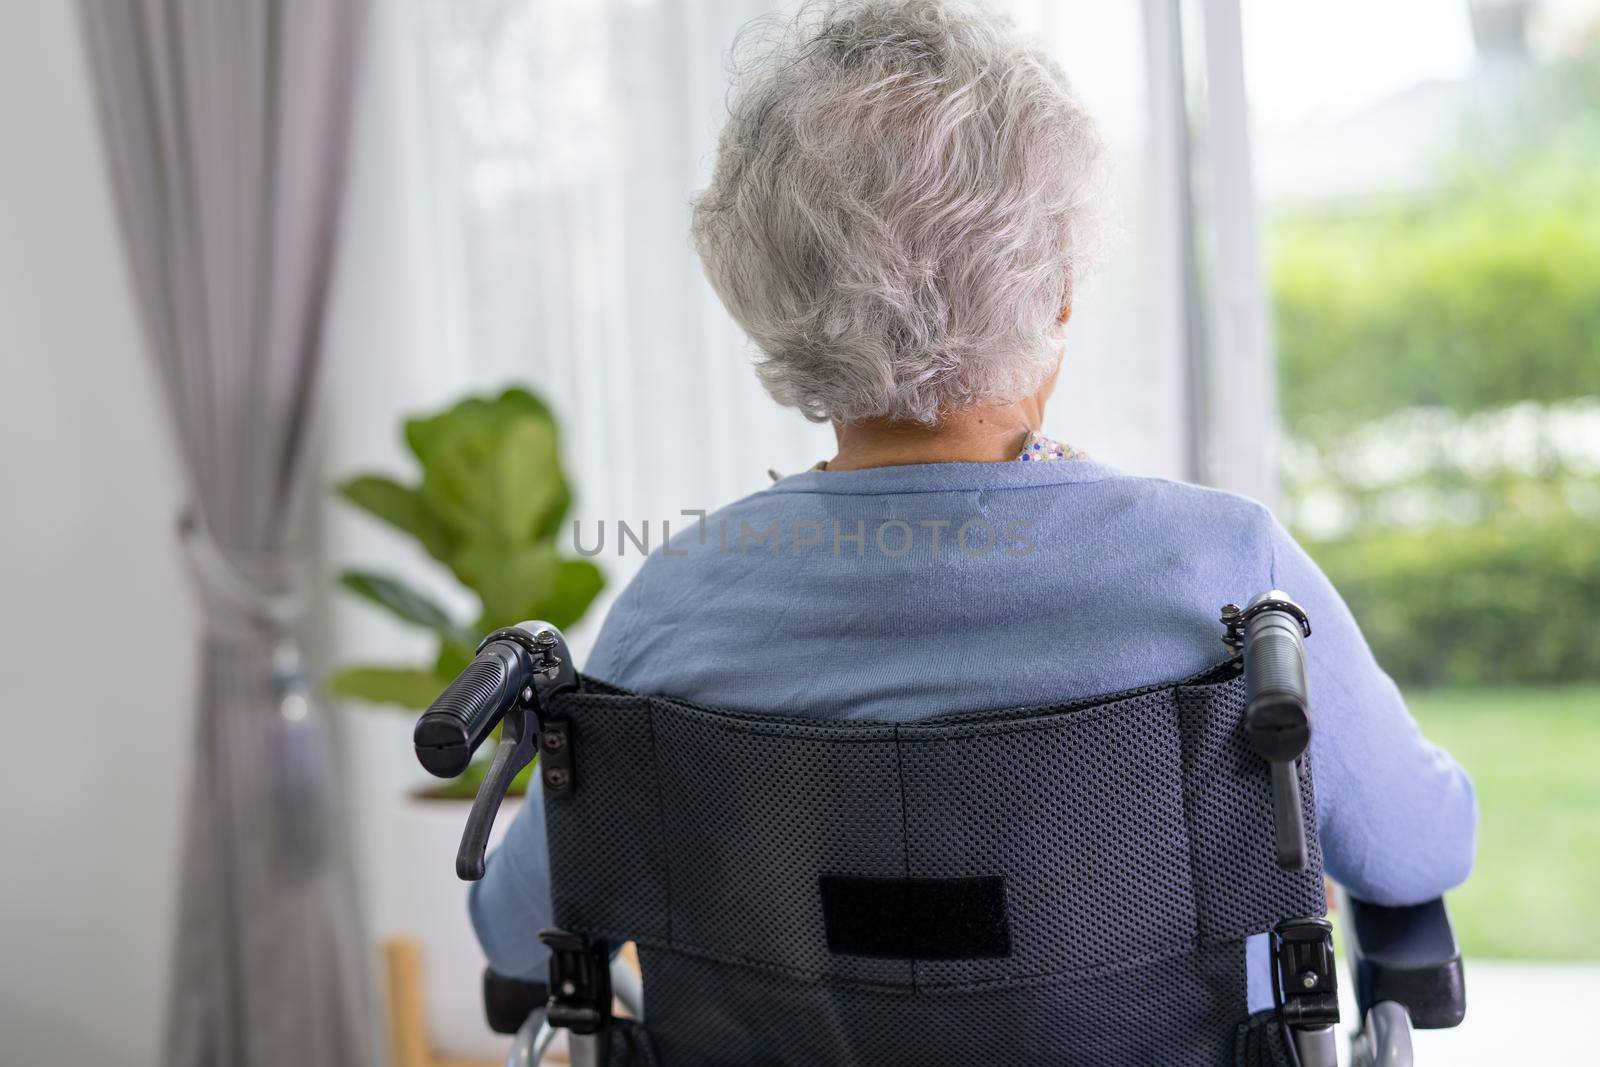 An elderly woman sitting on wheelchair looking out the window for waiting someone. Sadly, melancholy and depressed.